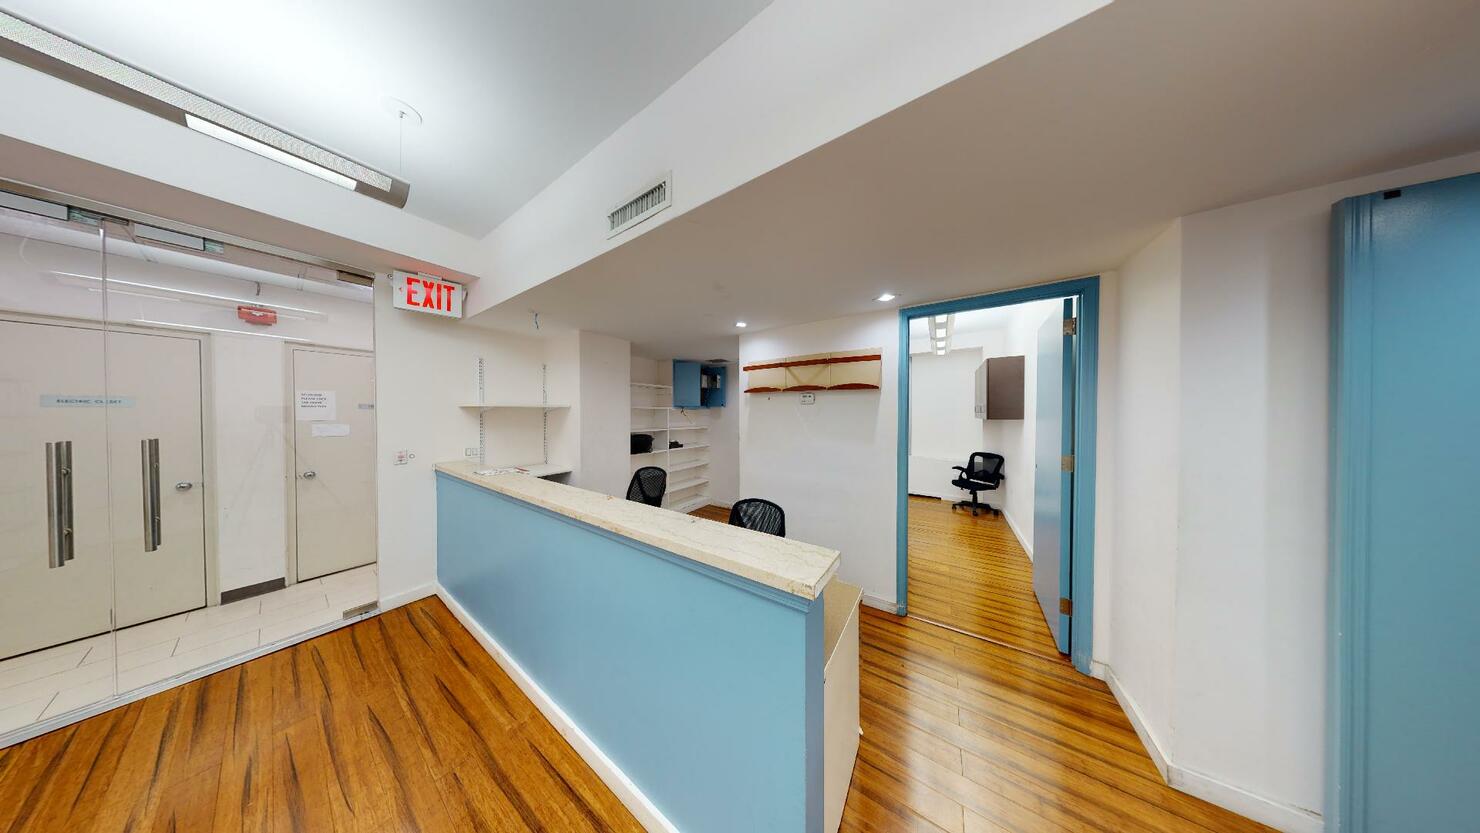 3,100 SF medical space for lease with 7 treatment rooms at 369 Lexington Avenue in Manhattan.